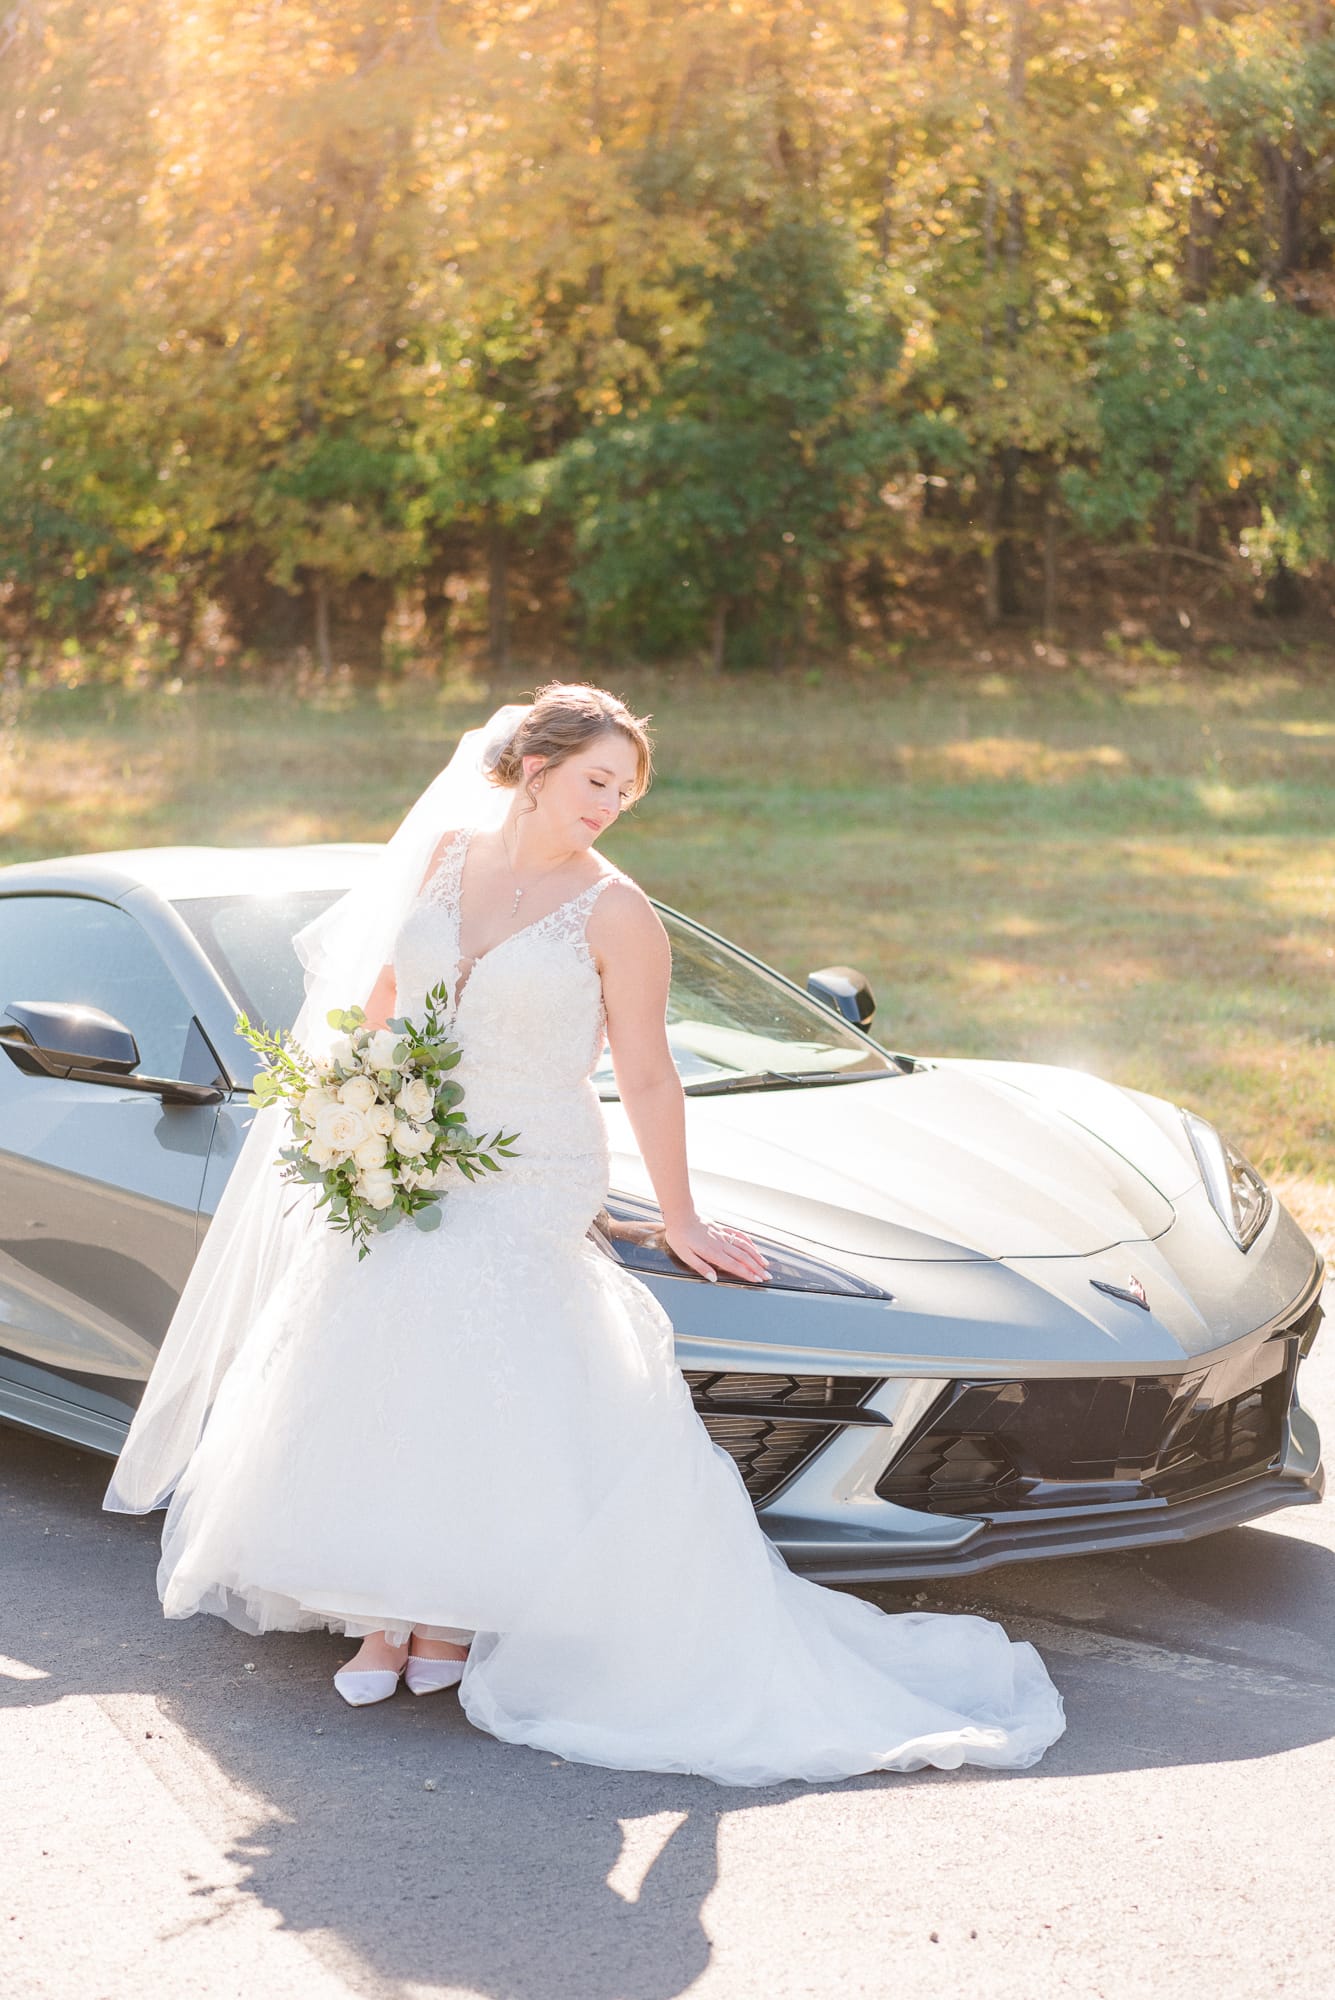 Katelynn stands next to her sleek, grey car in front of the forest at Low Meadows Estate.